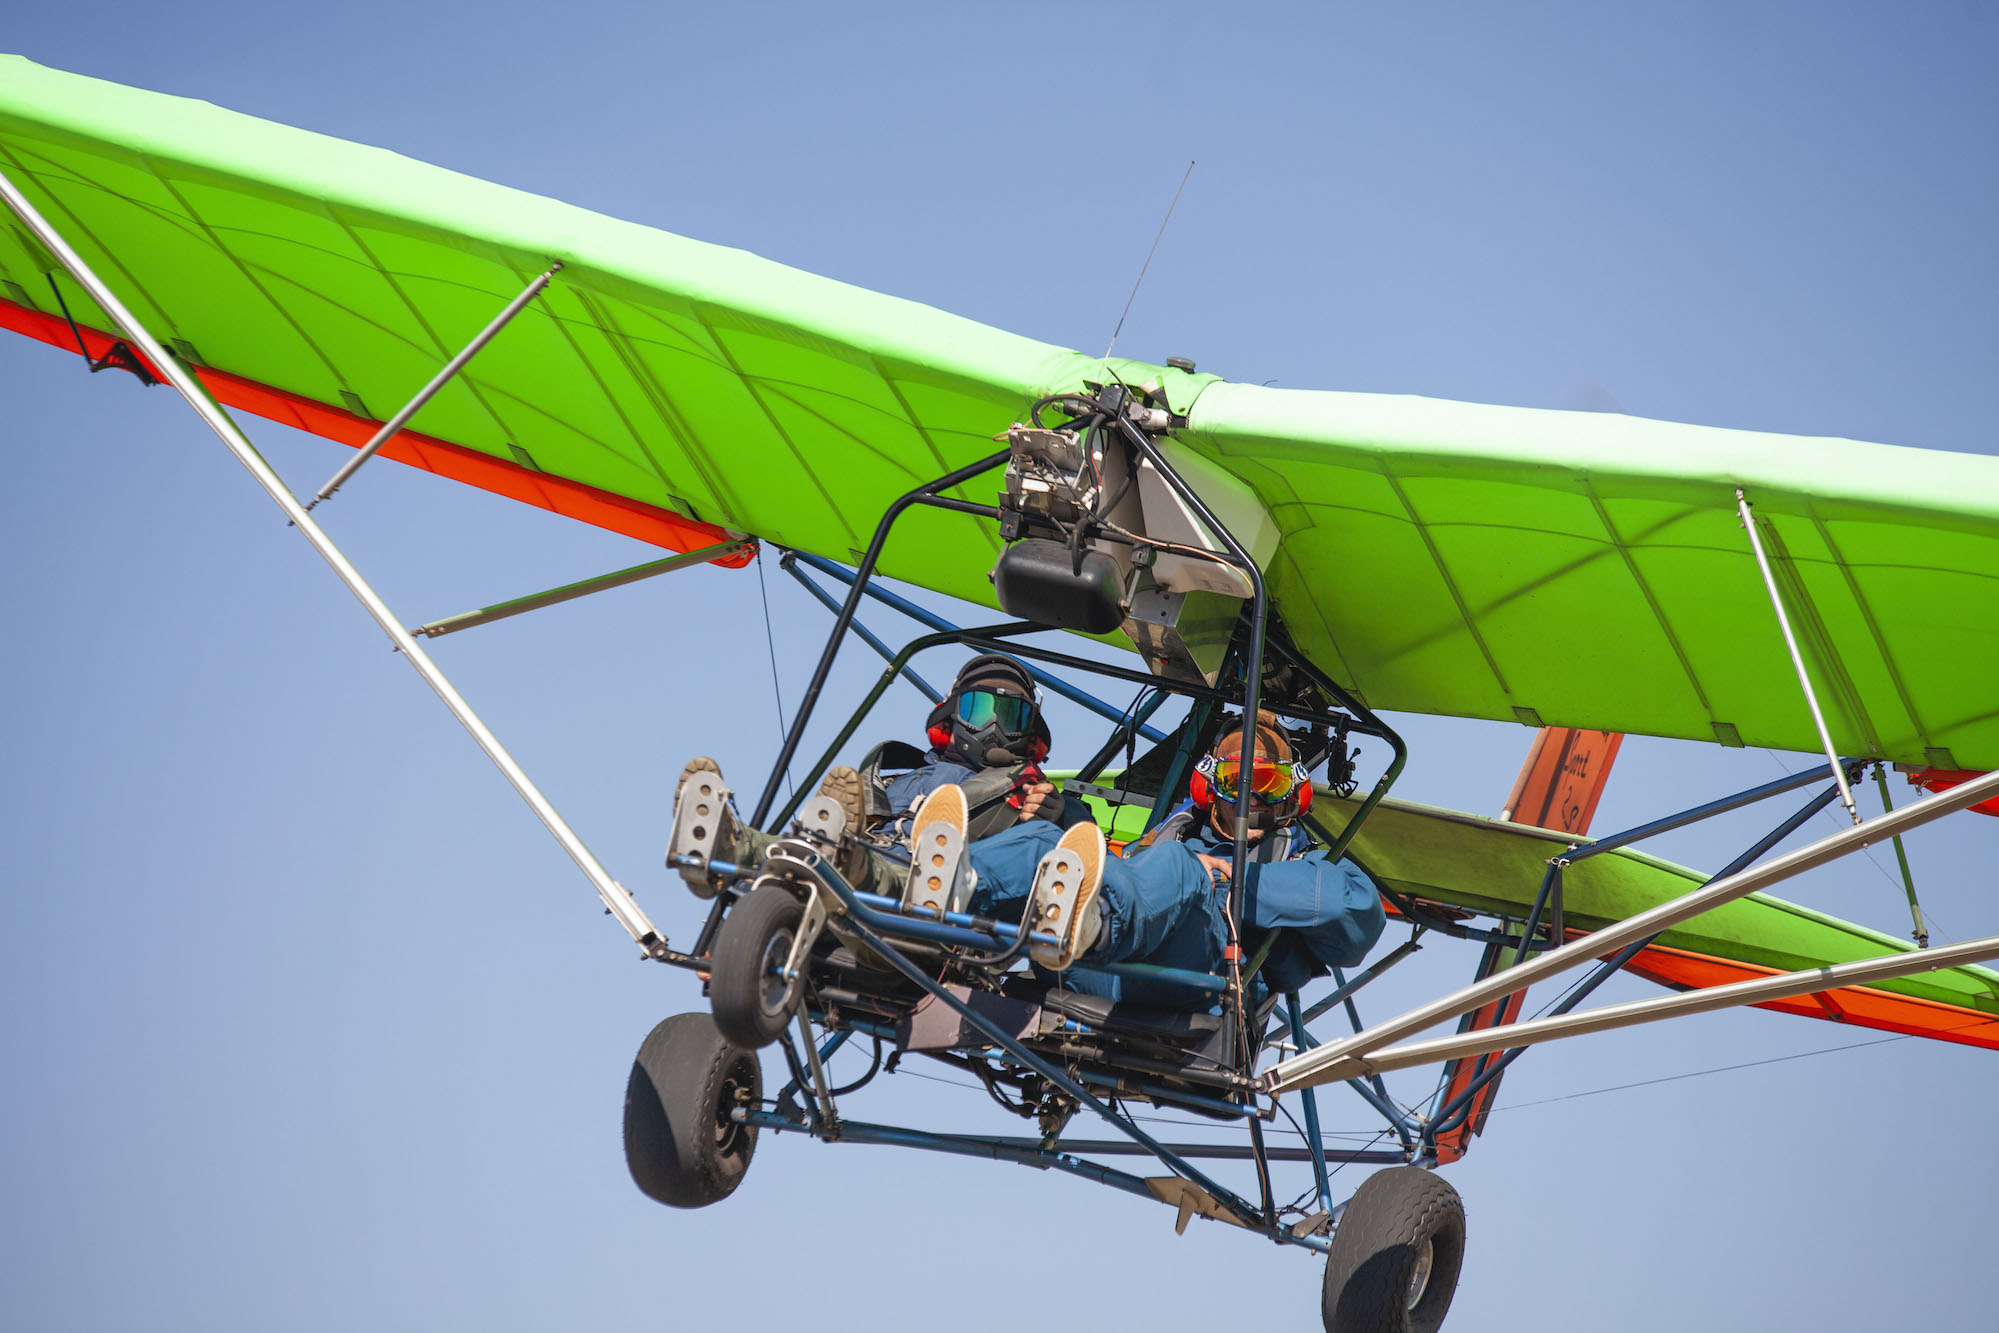 Two riders in a ultralight plane at Skyrider Ultralights in Camarillo